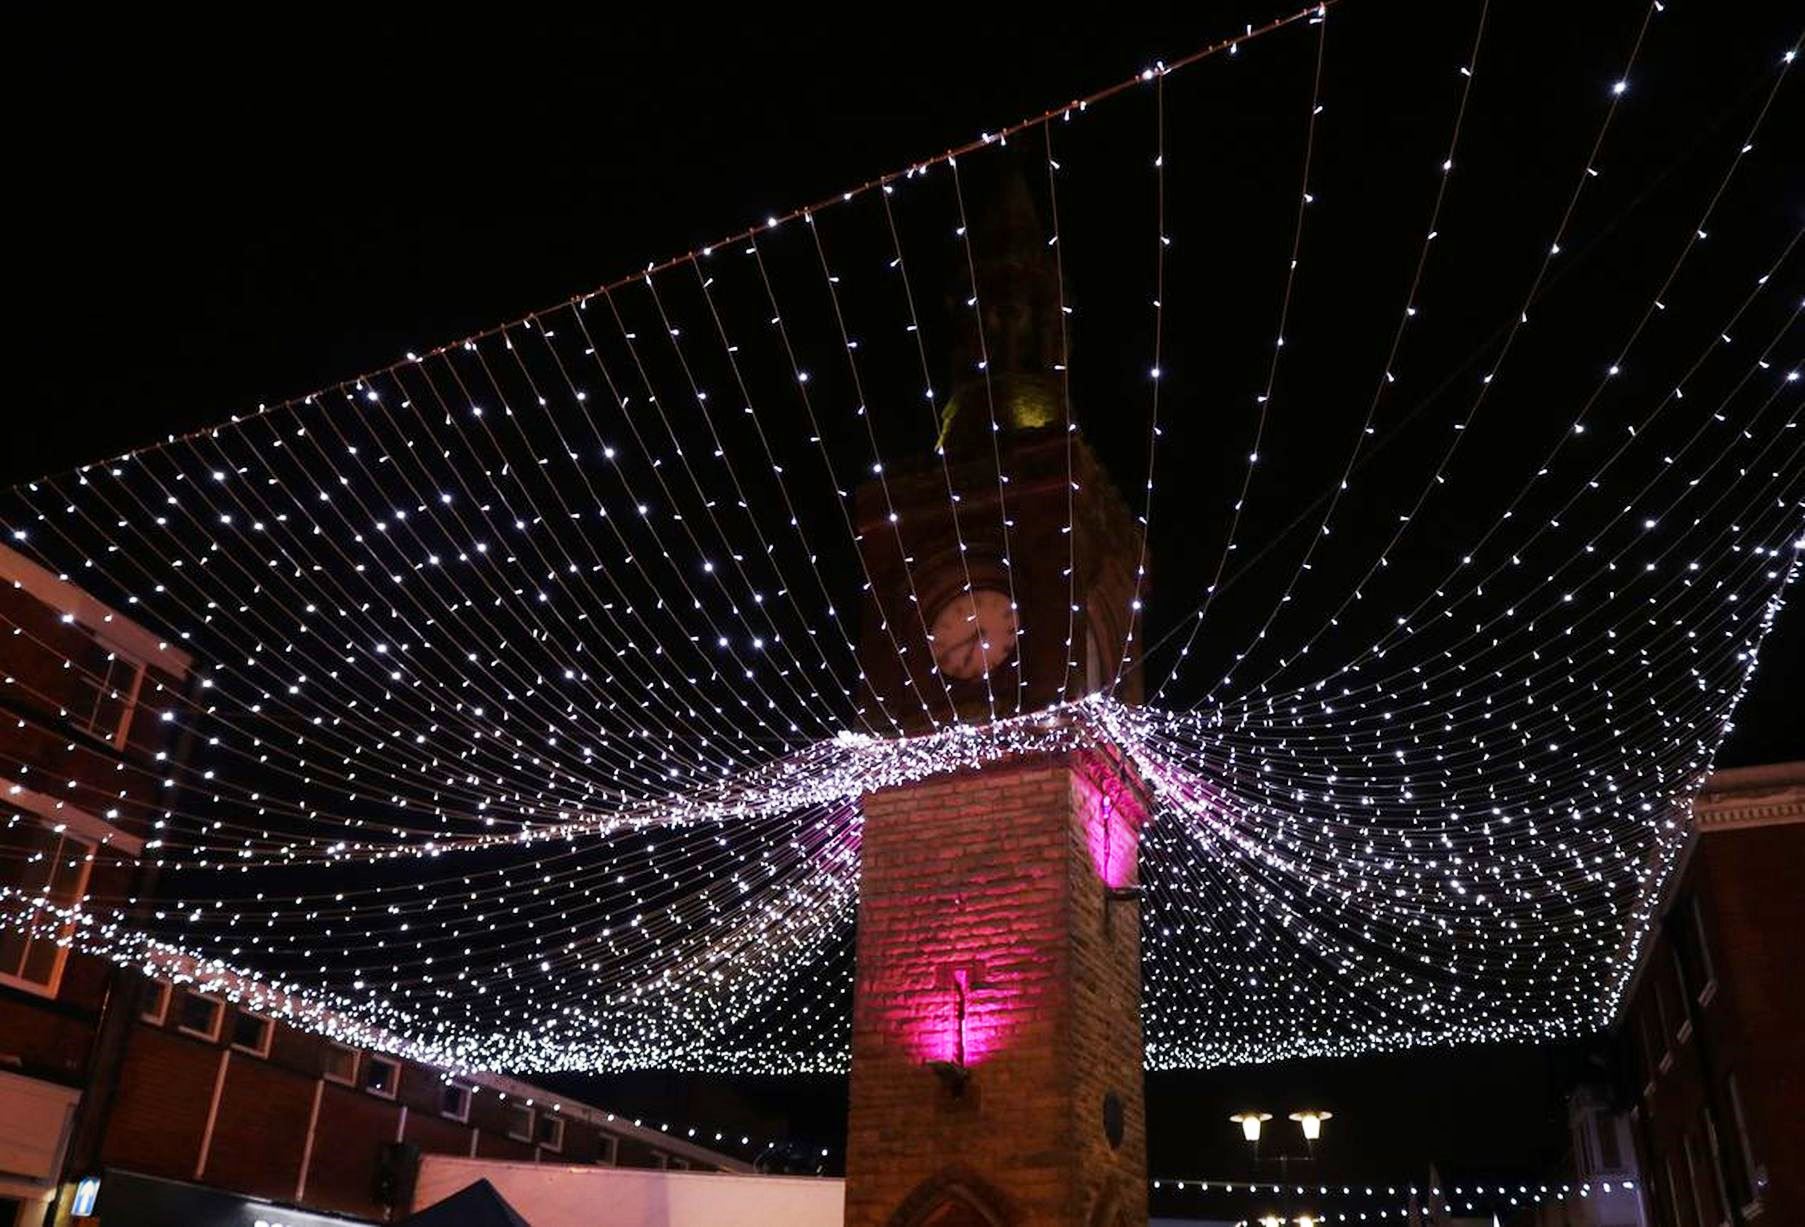 LIGHTING UP THE TOWN CENTRE FOR CHRISTMAS